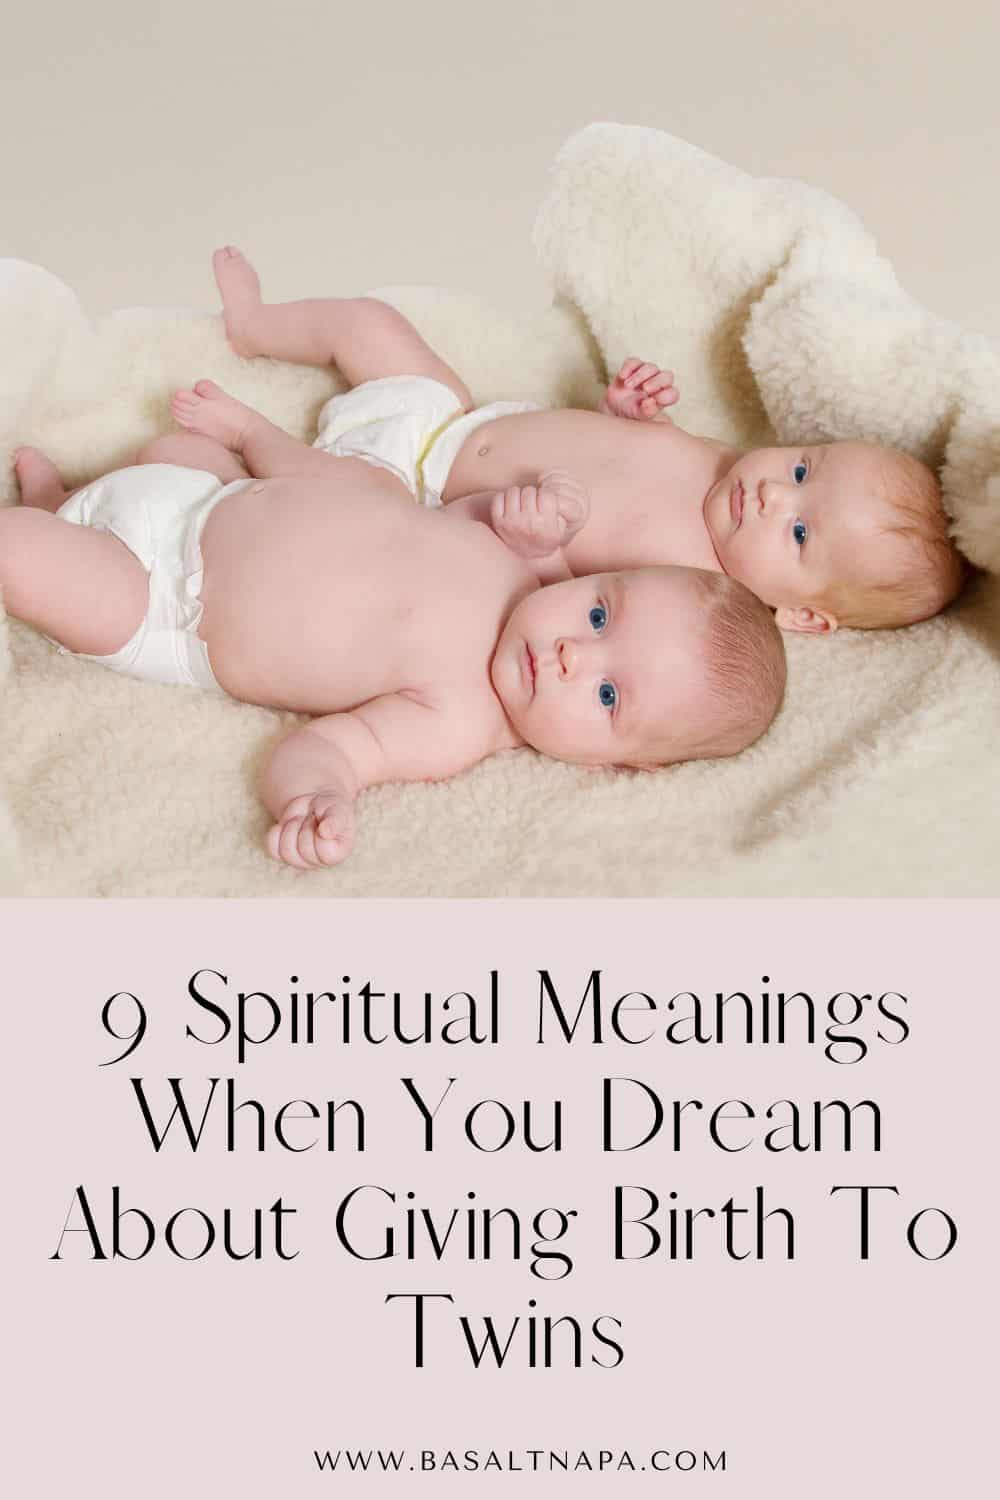 What does it mean when dreaming about giving birth to twins